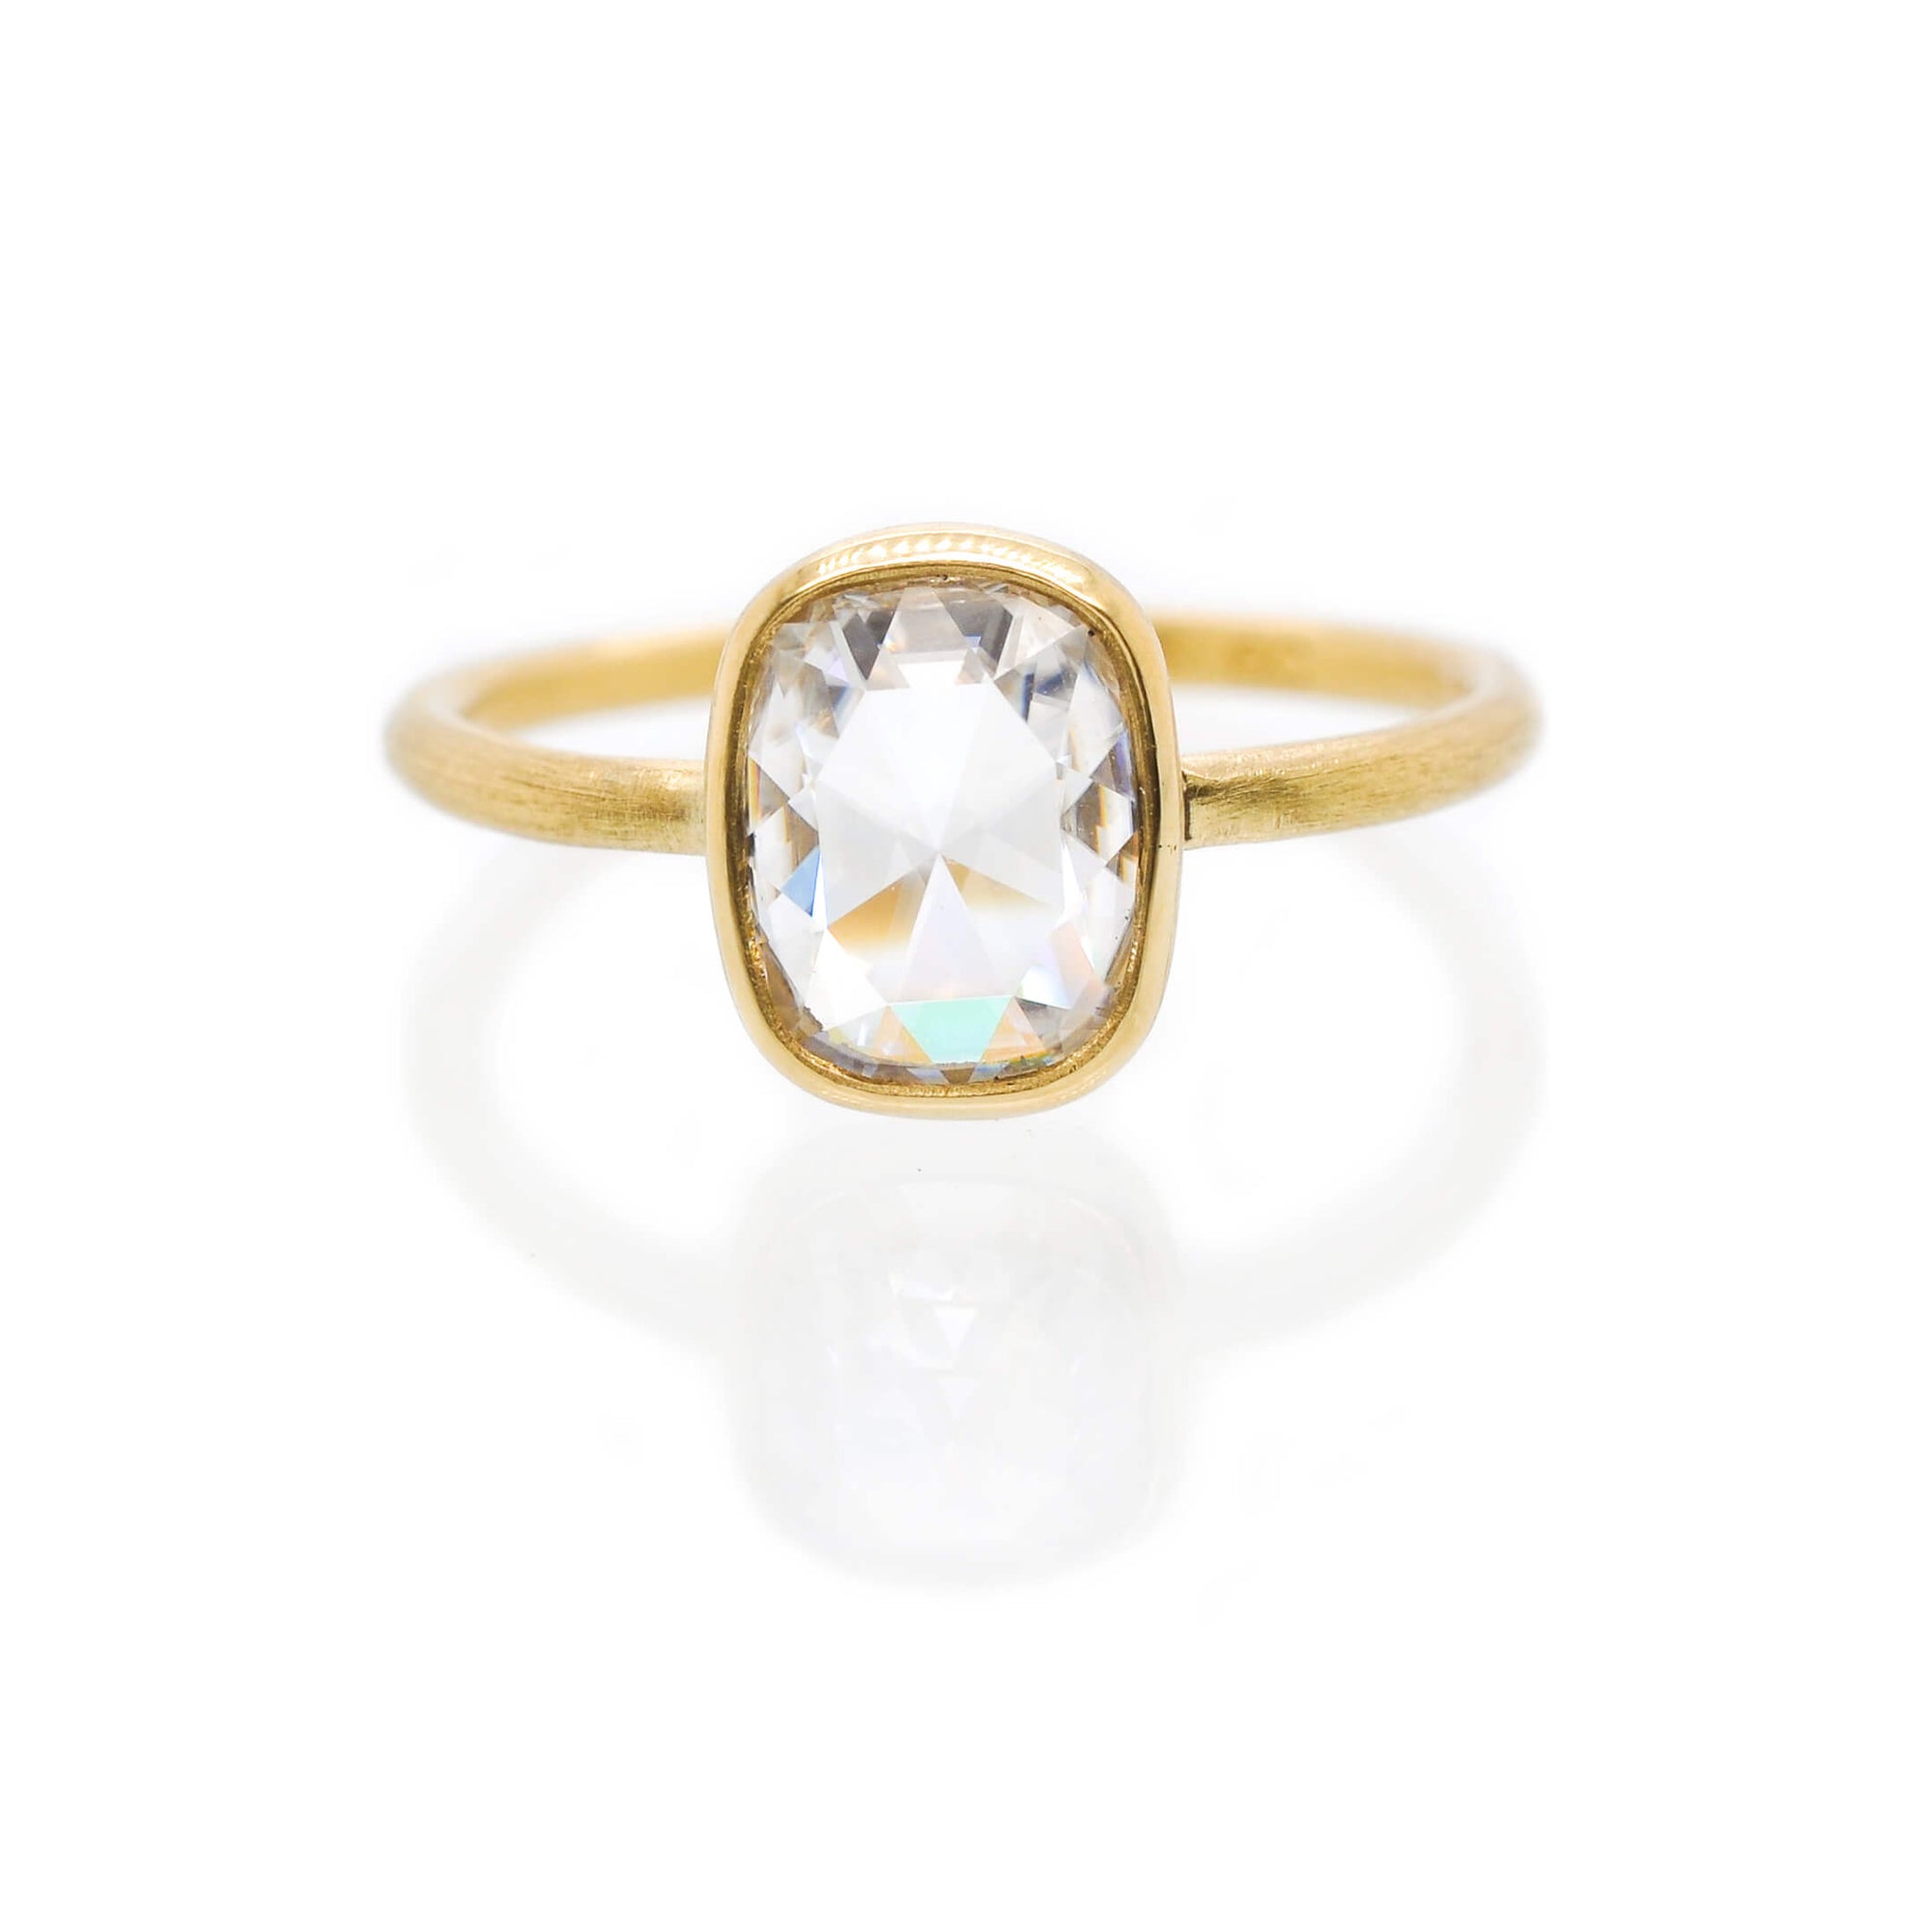 Cushion cut Moissanite ring in 18k yellow gold. Handmade by EC Design Jewelry in Minneapolis, MN.